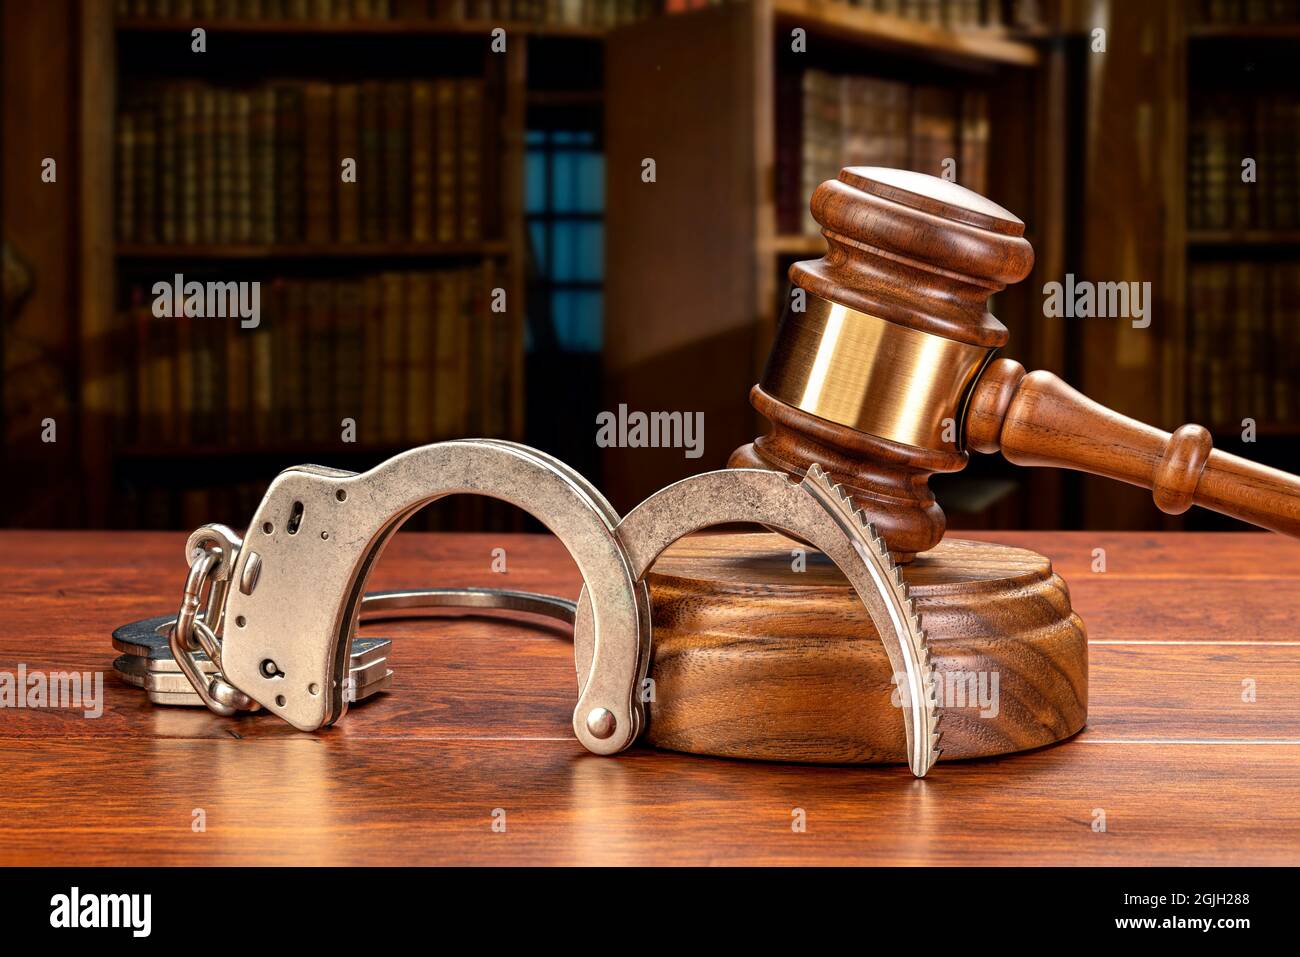 A pair of handcuffs rests against a judge's gavel and block in a judge's law chamber.  For inferences regarding public safety, crime, law and punishme Stock Photo